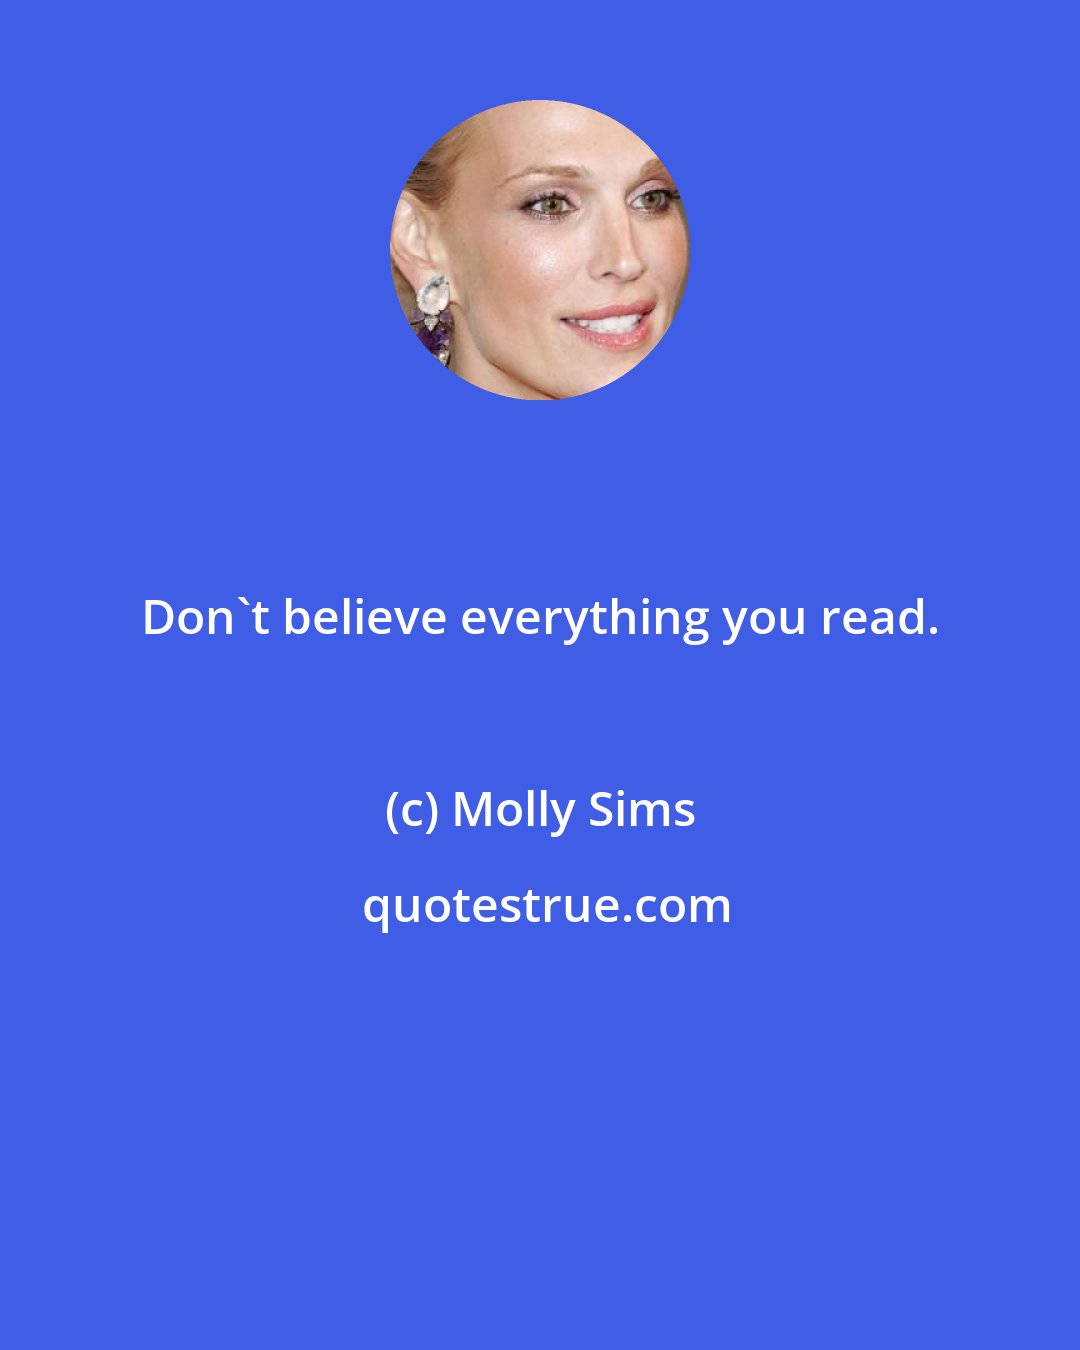 Molly Sims: Don't believe everything you read.